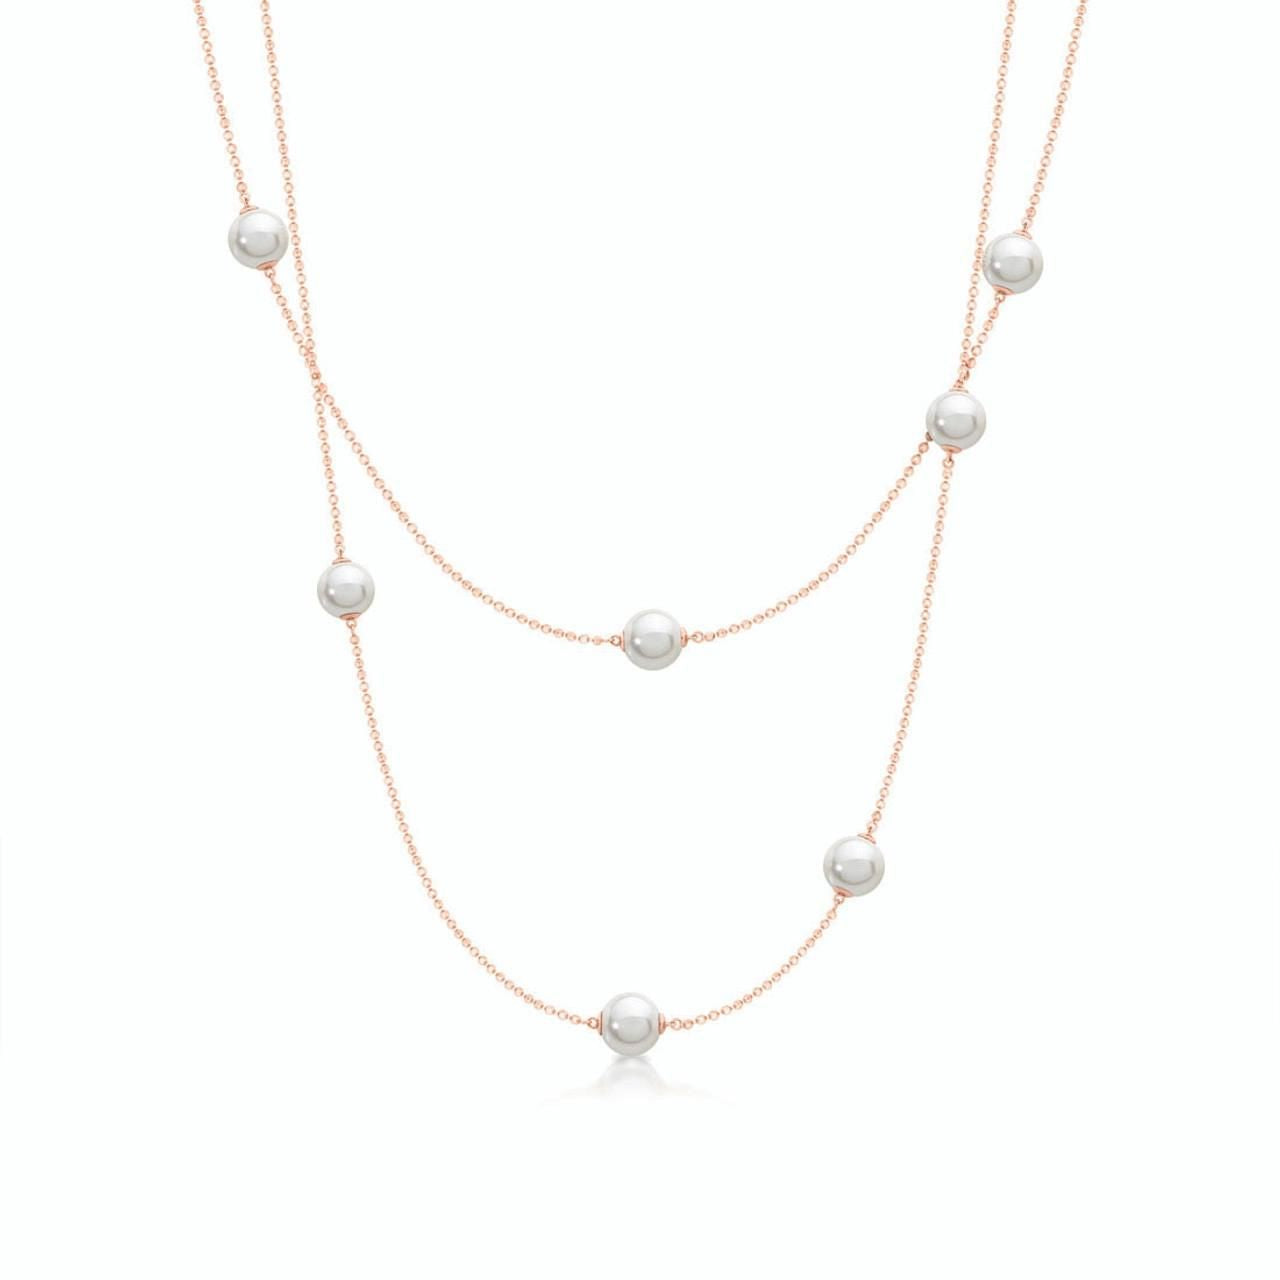 Romi Dublin Rose Gold Necklace Pearls & Chain  The classics are what draw us back time and time again and nothing is more classic than Pearls. We were inspired with this collection to bring a modern twist to a timeless classic.